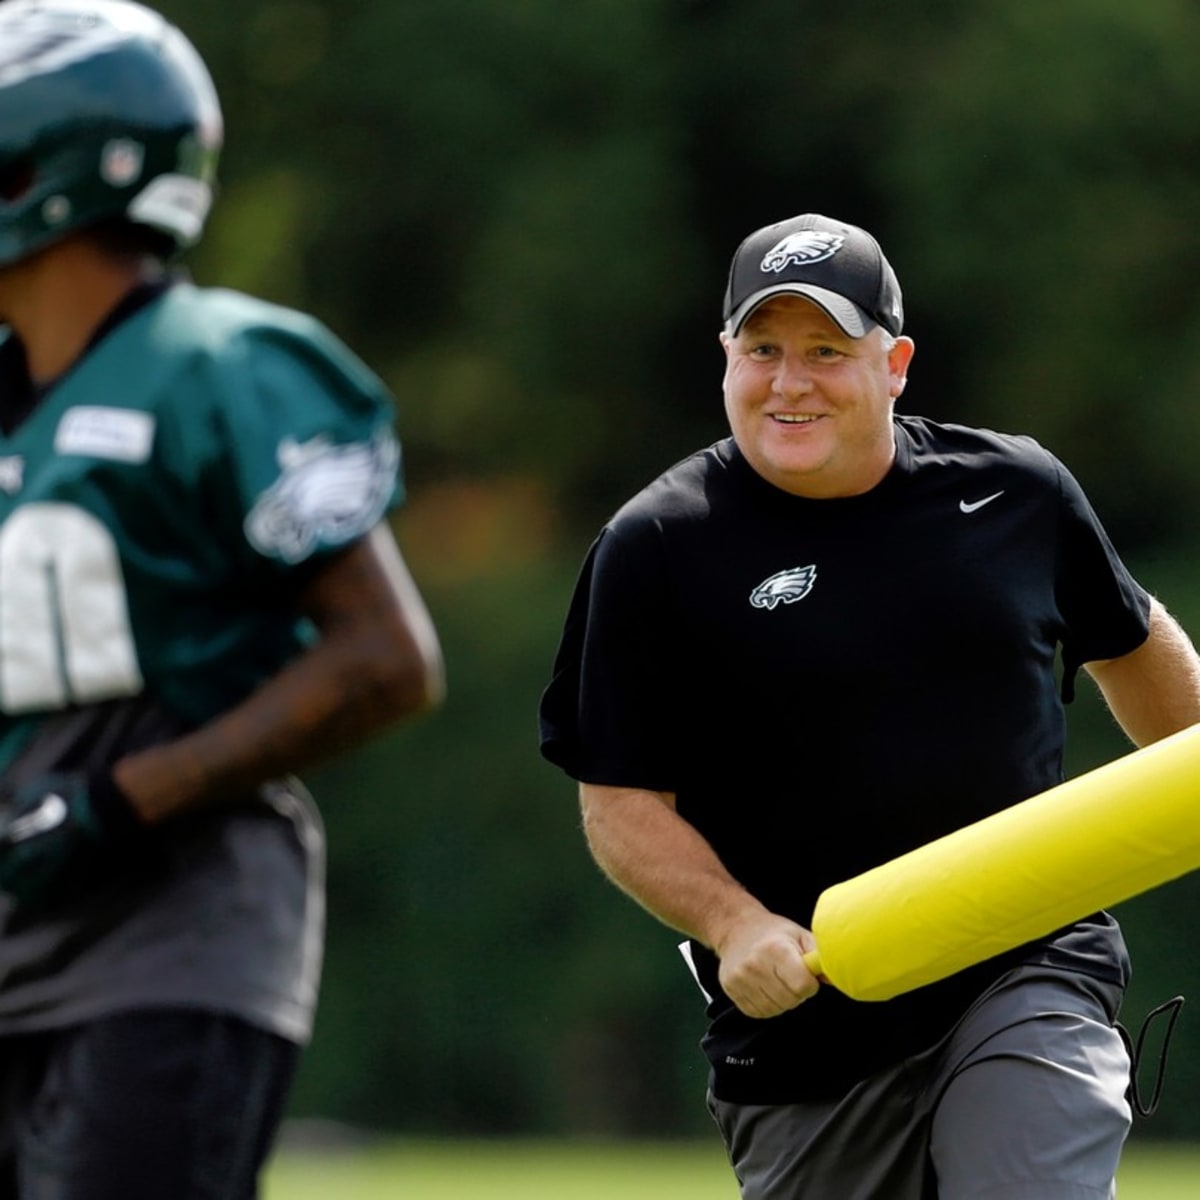 Report: Eagles will not be hiring Seahawks assistant coach after